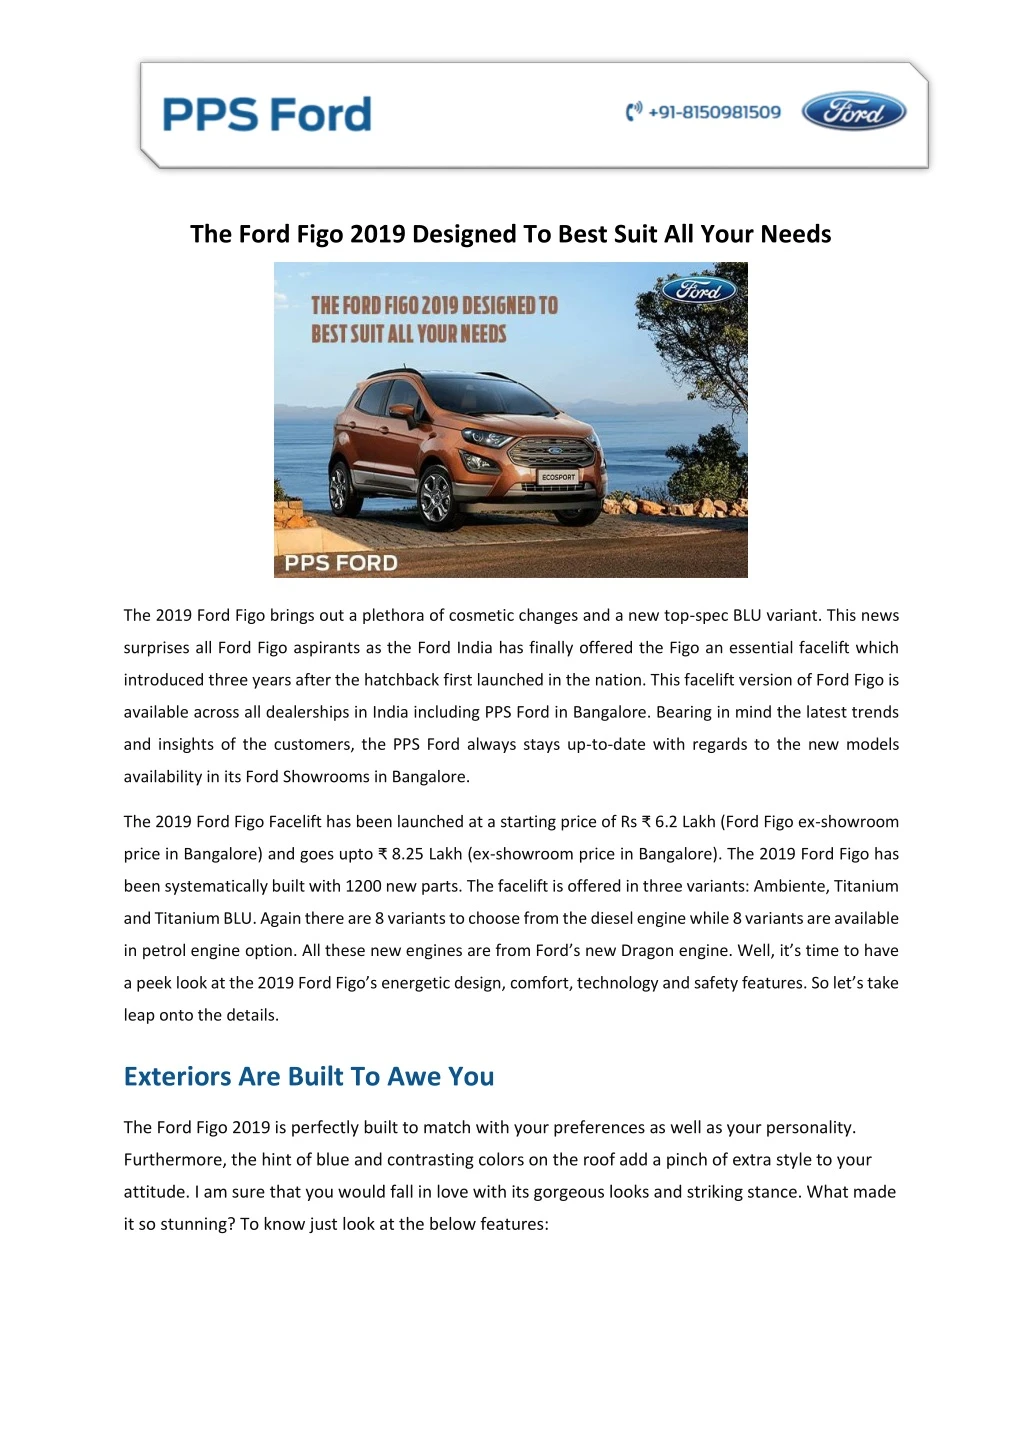 the ford figo 2019 designed to best suit all your